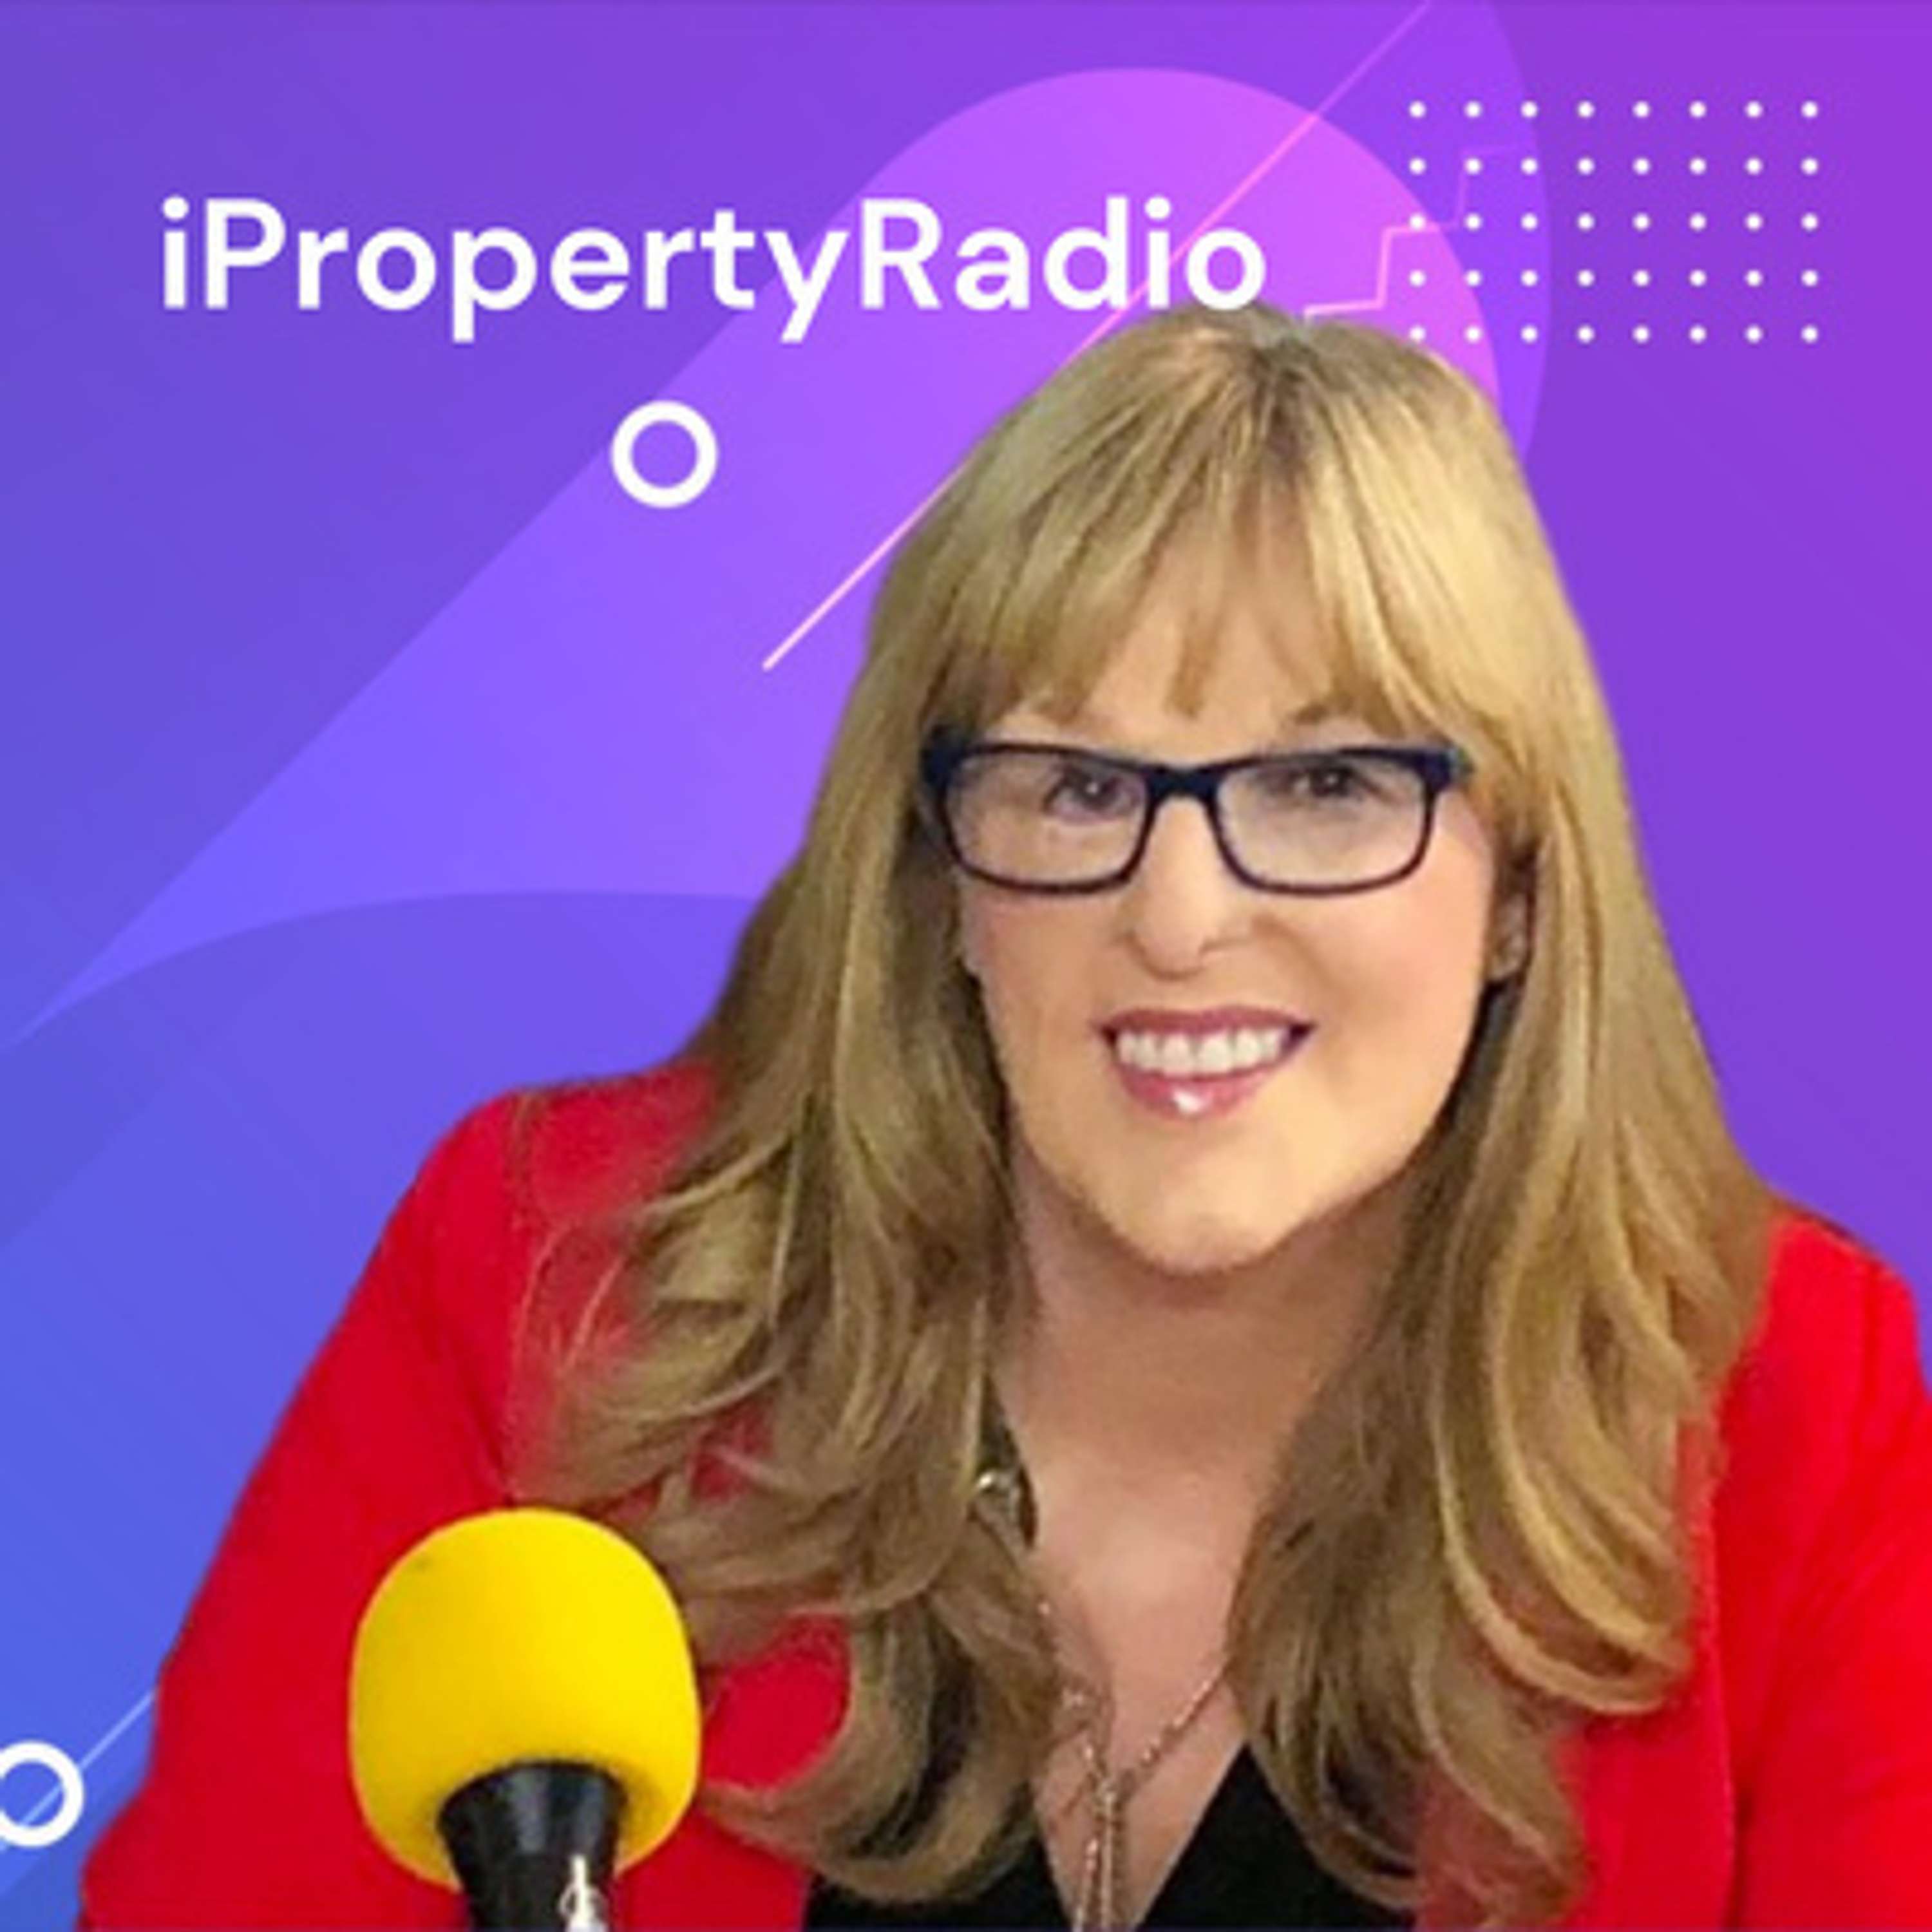 Ep.29 iPropertyRadio: Property Matters, August 13th 2019